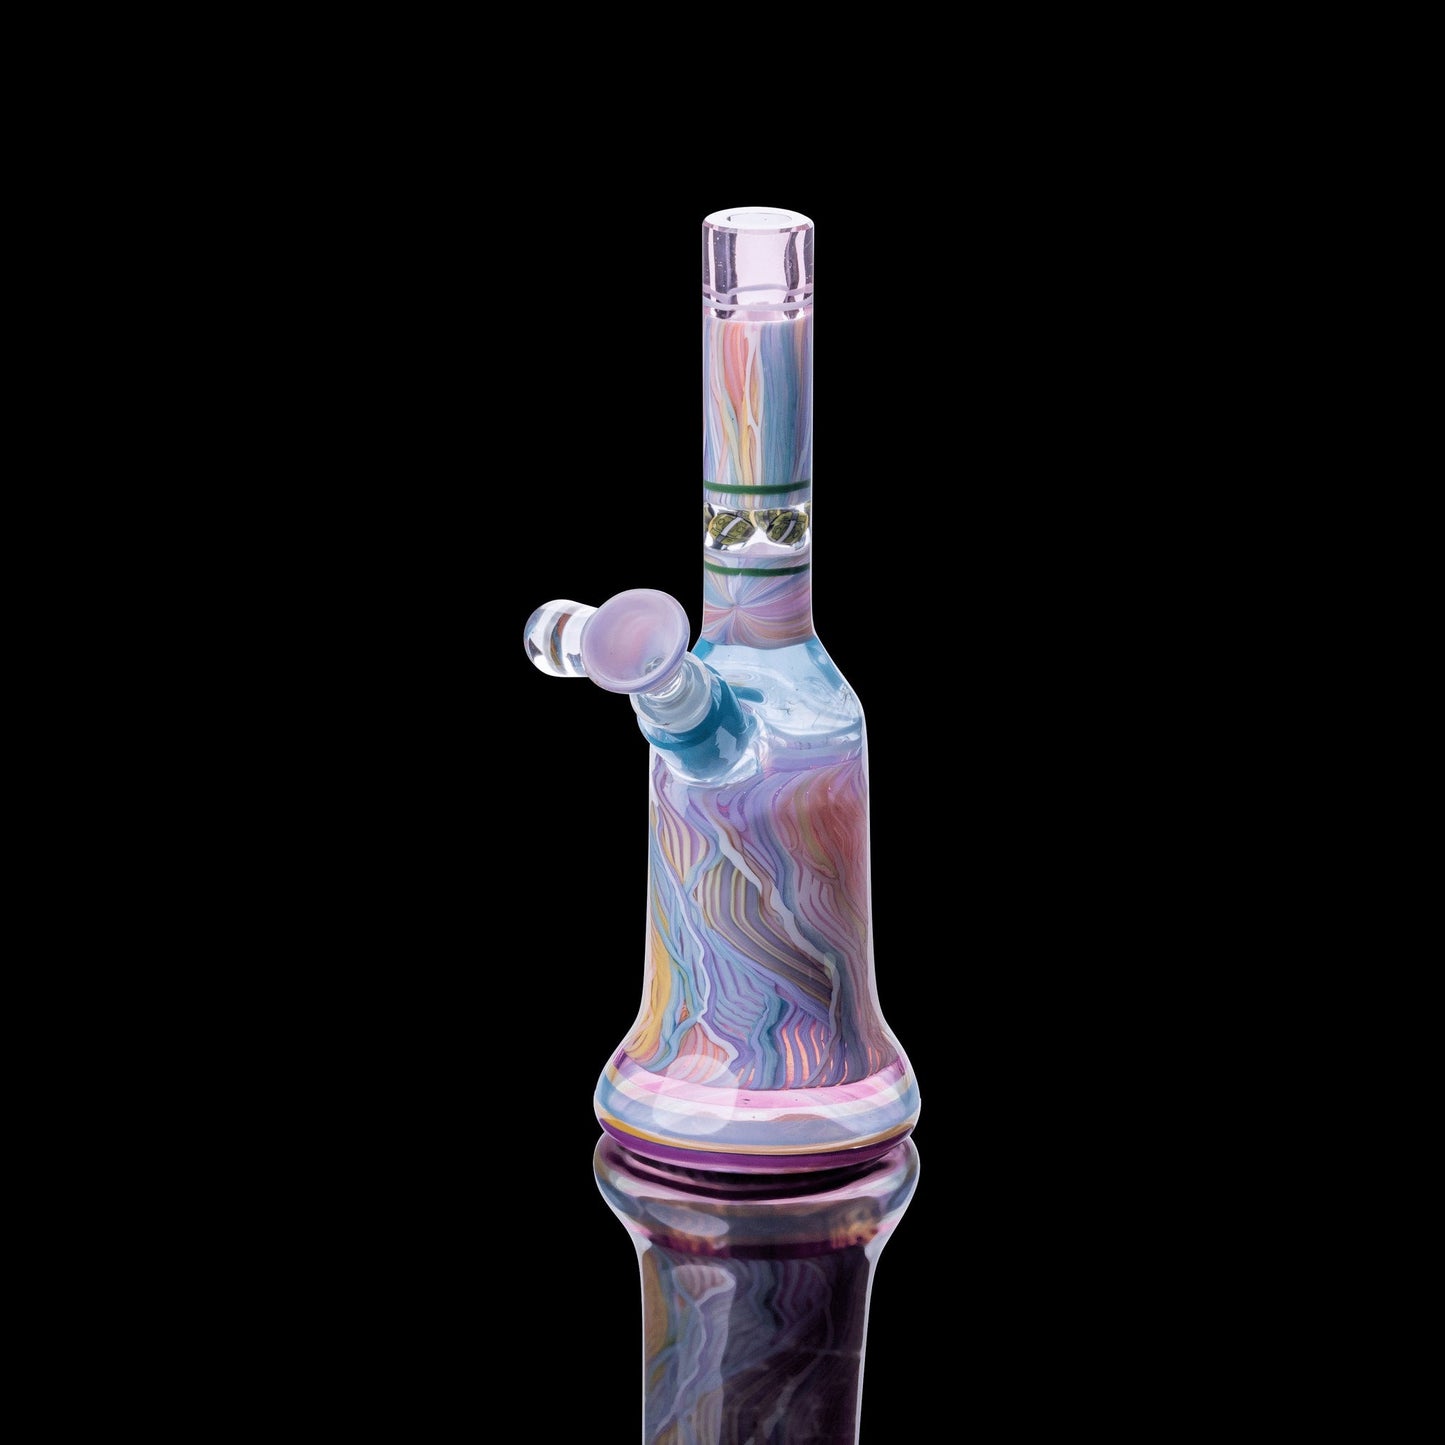 hand-blown art piece - Collab Insano Tube by GROE x Trip A (Got The Juice 2022)